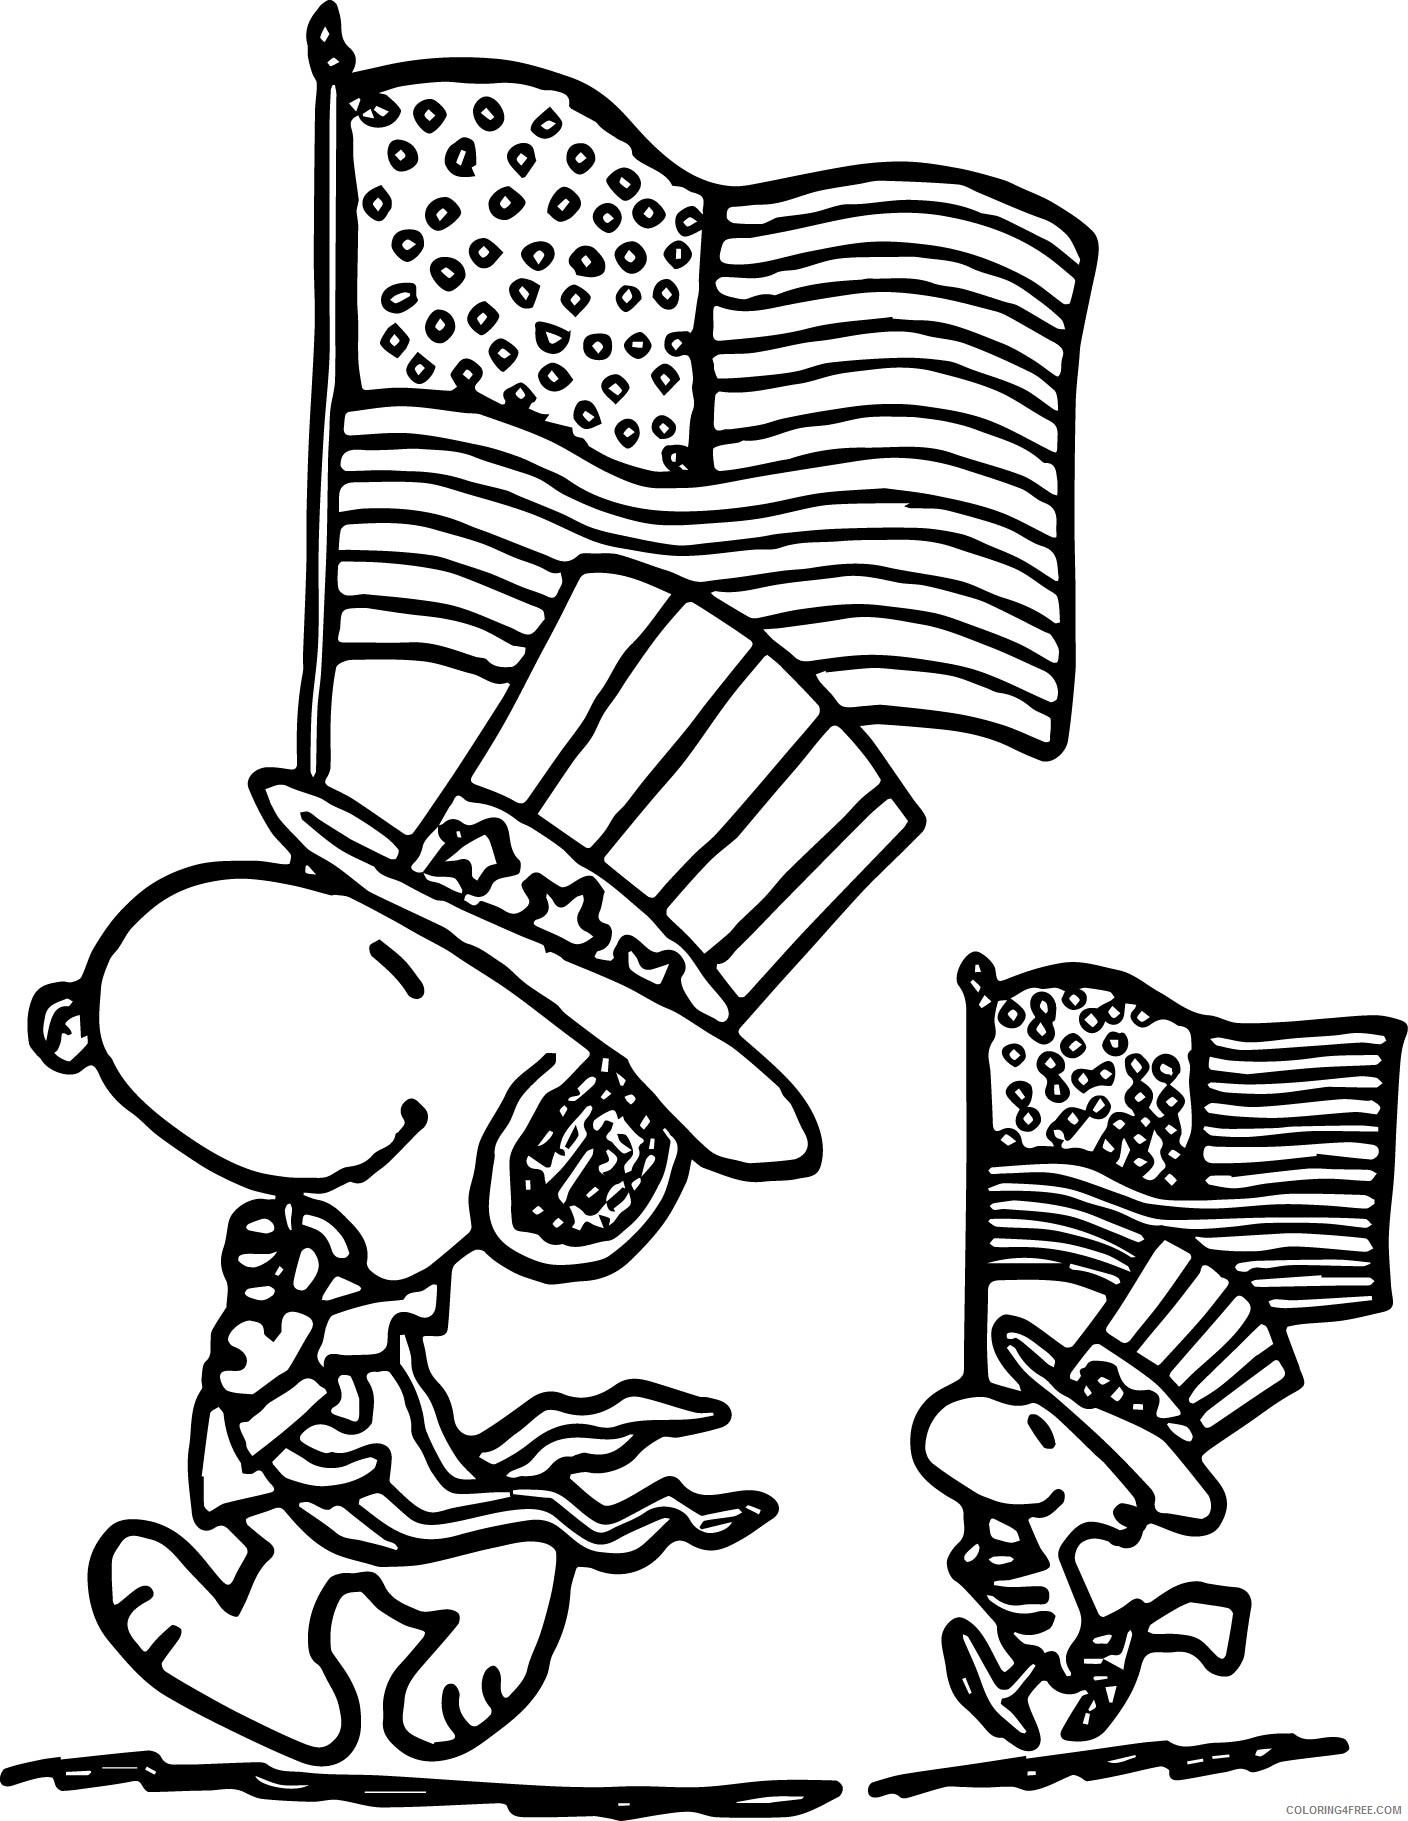 Snoopy Coloring Pages Cartoons Snoopy Flag Day Printable 2020 5693 Coloring4free